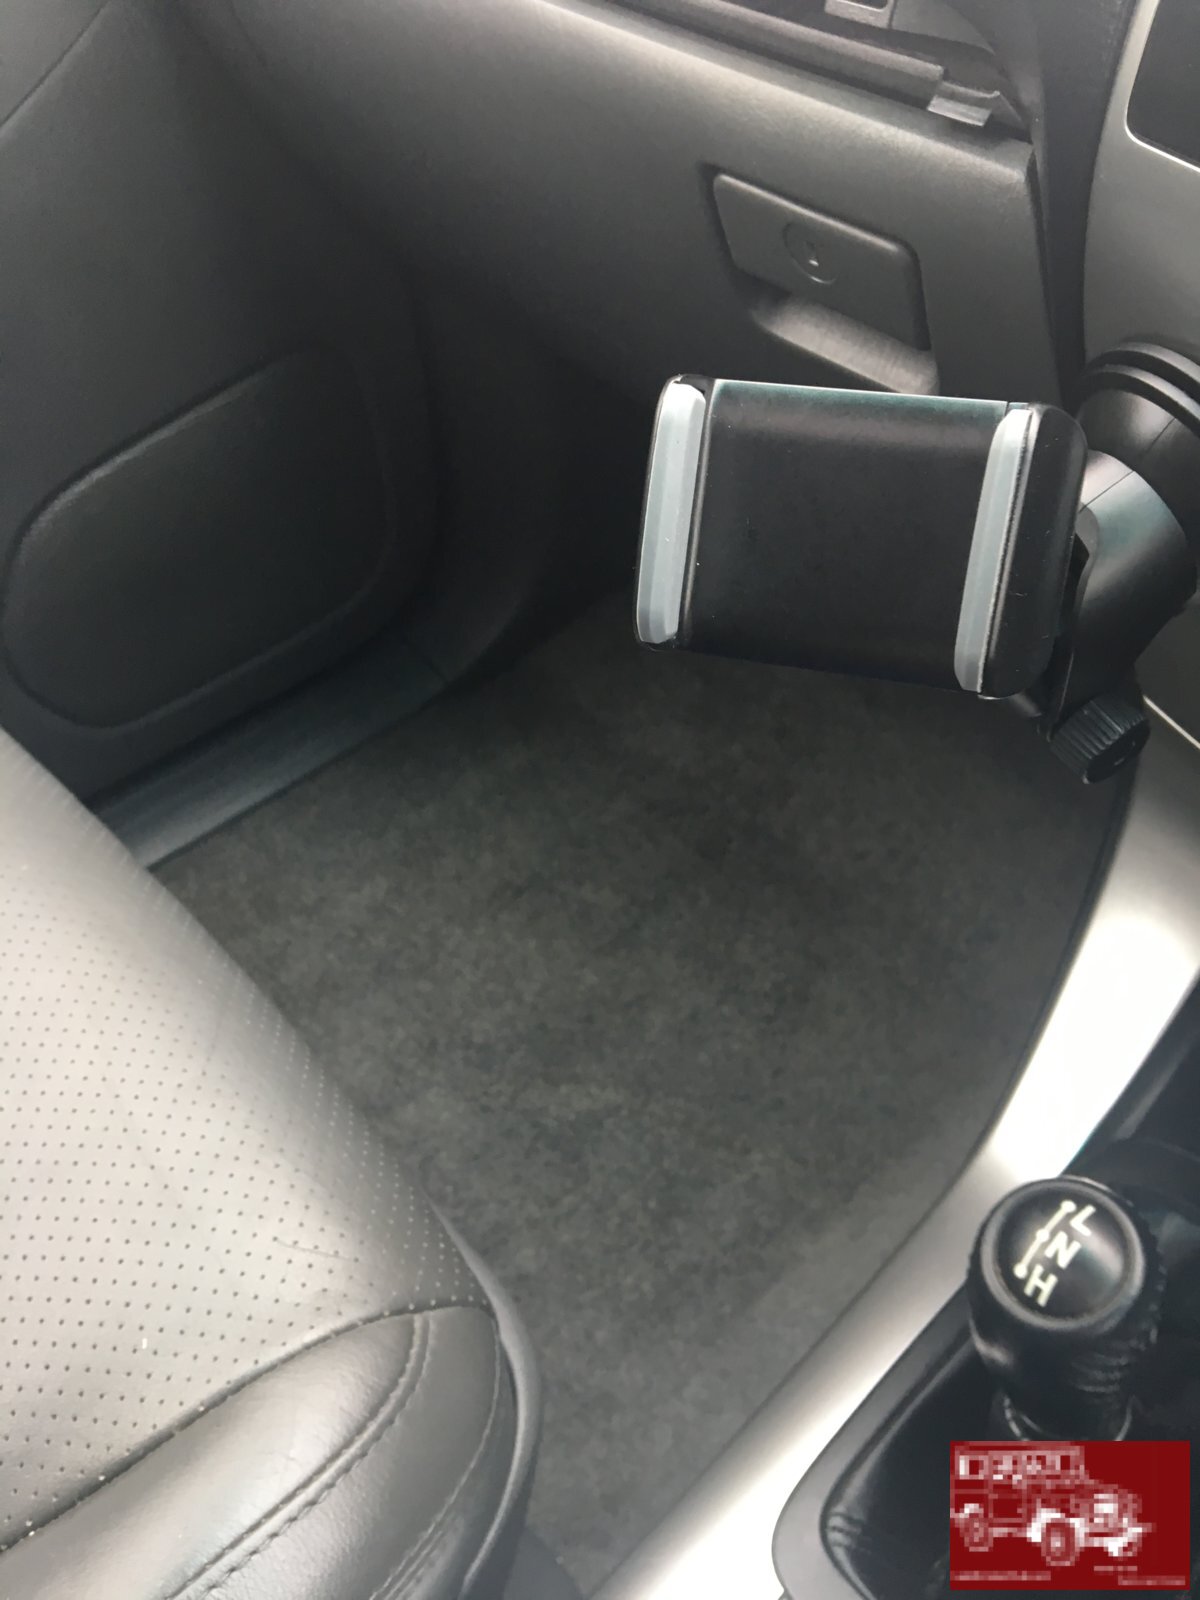 Footwell scrubbed up well